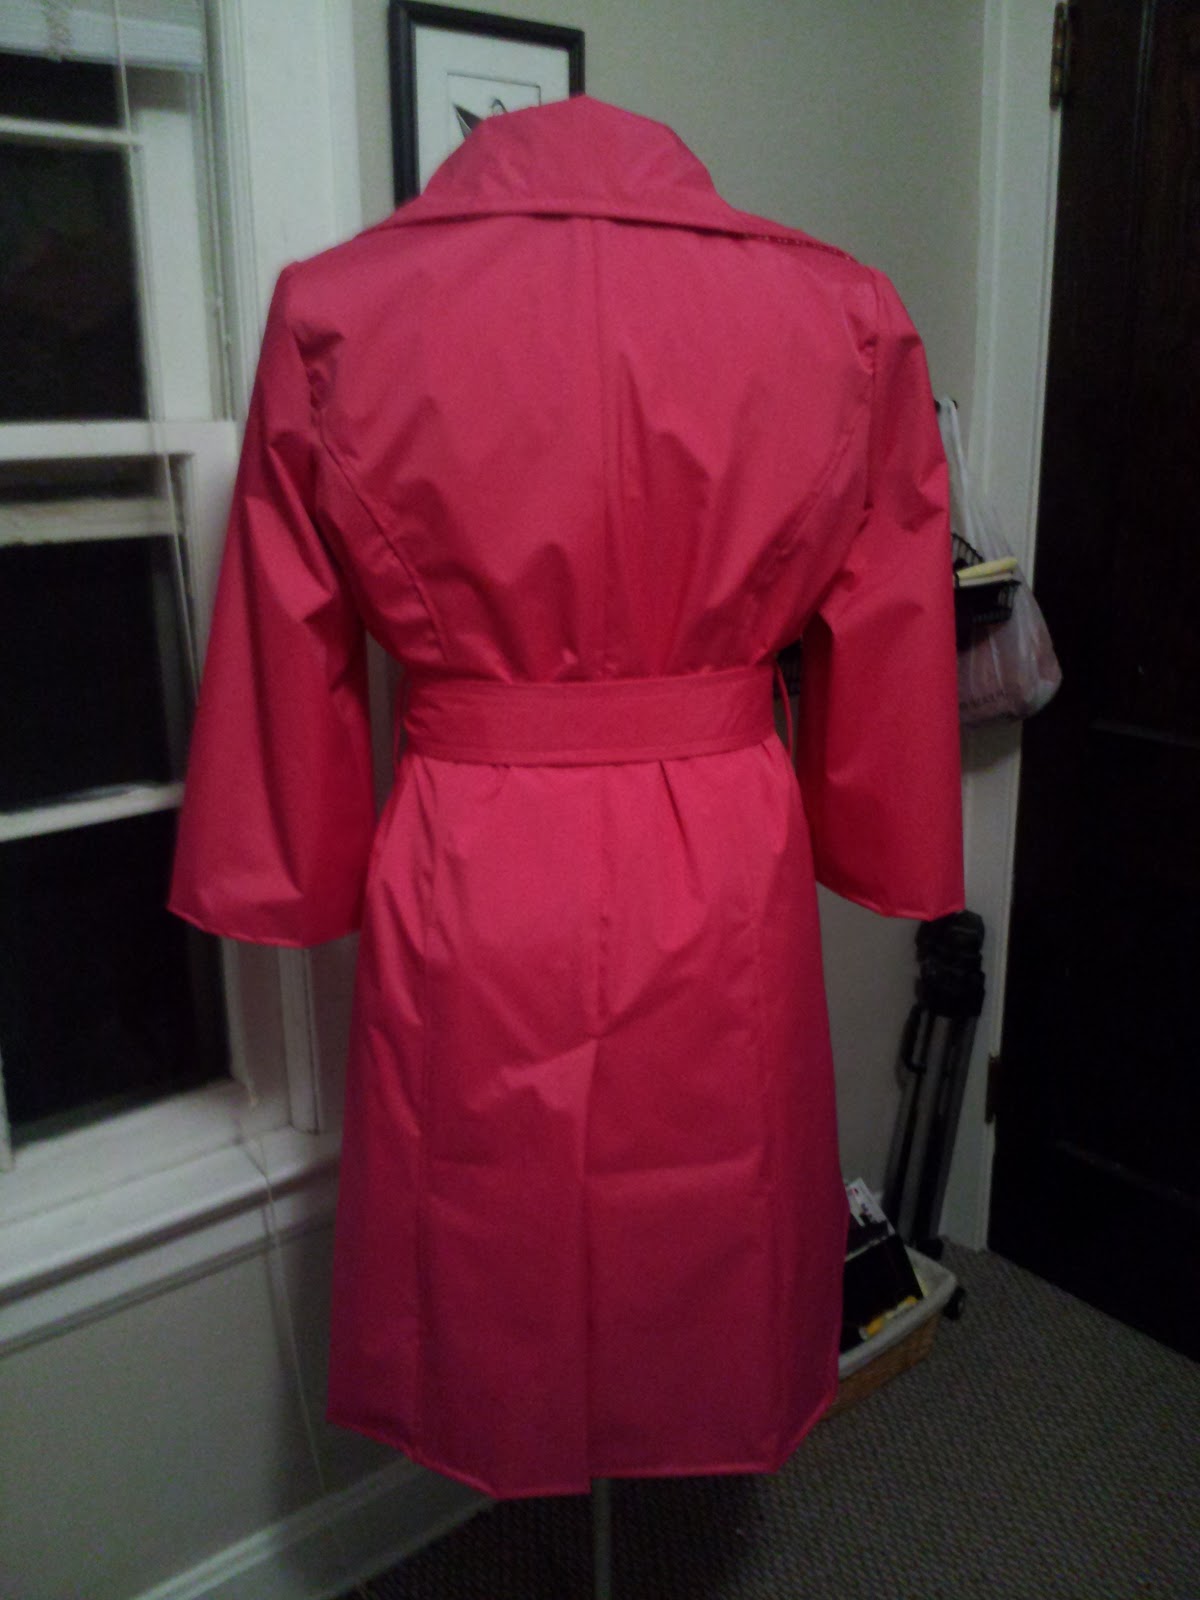 Sewing in Style: My Fabulous Pink Raincoat - McCalls 5525